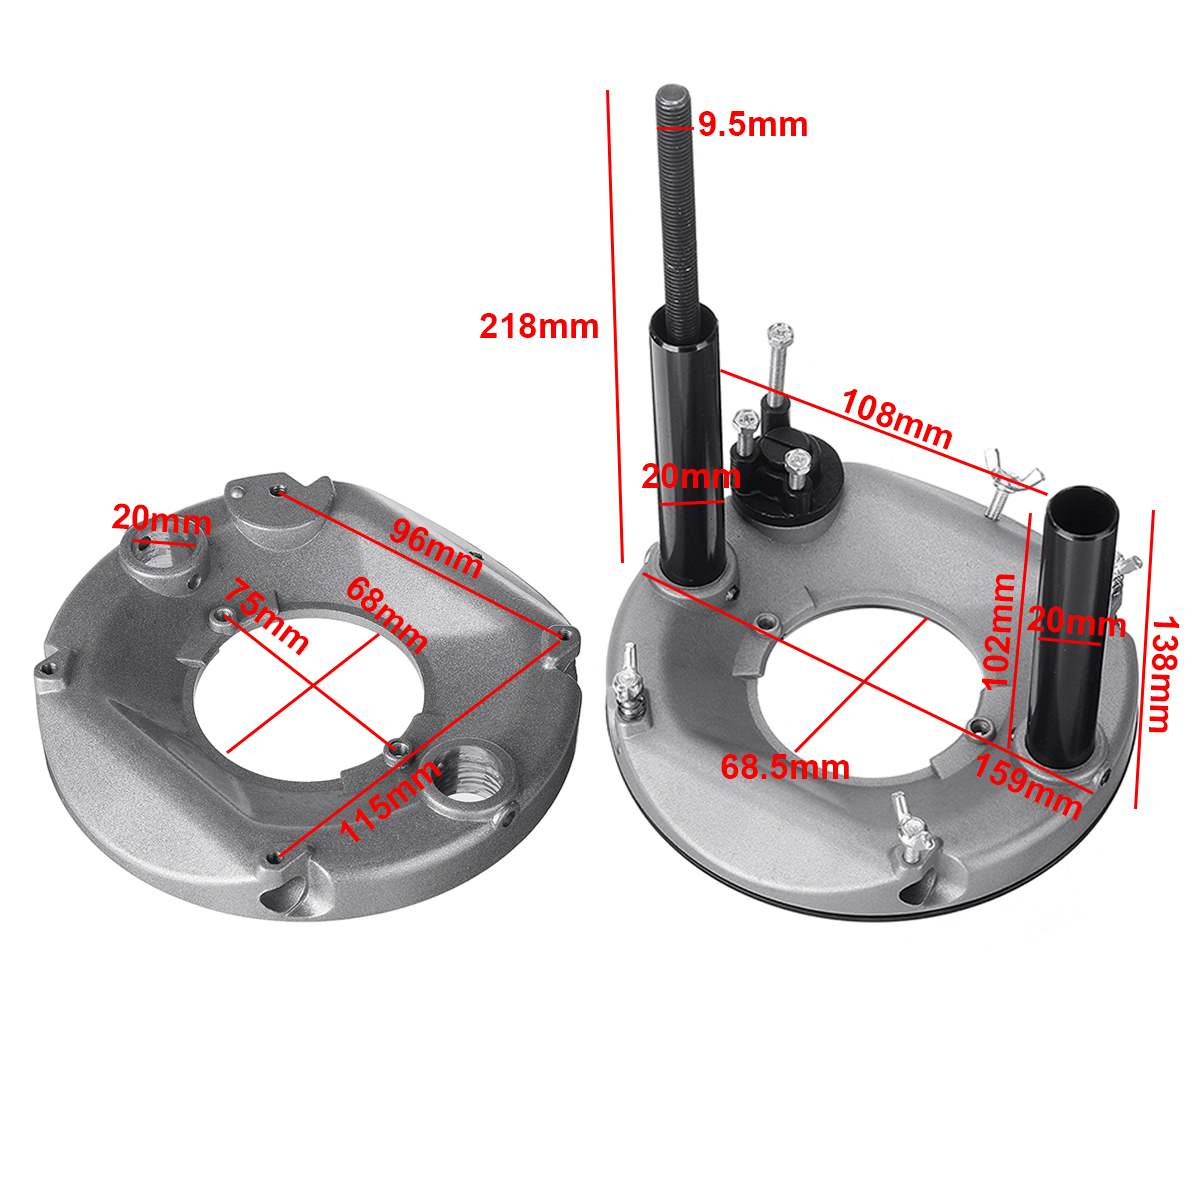 Metal Woodworking Trimmer Router Base Complete Assembly Replacement for Makita 3612 3612BR 3612C 612 Series Drillpro Tool